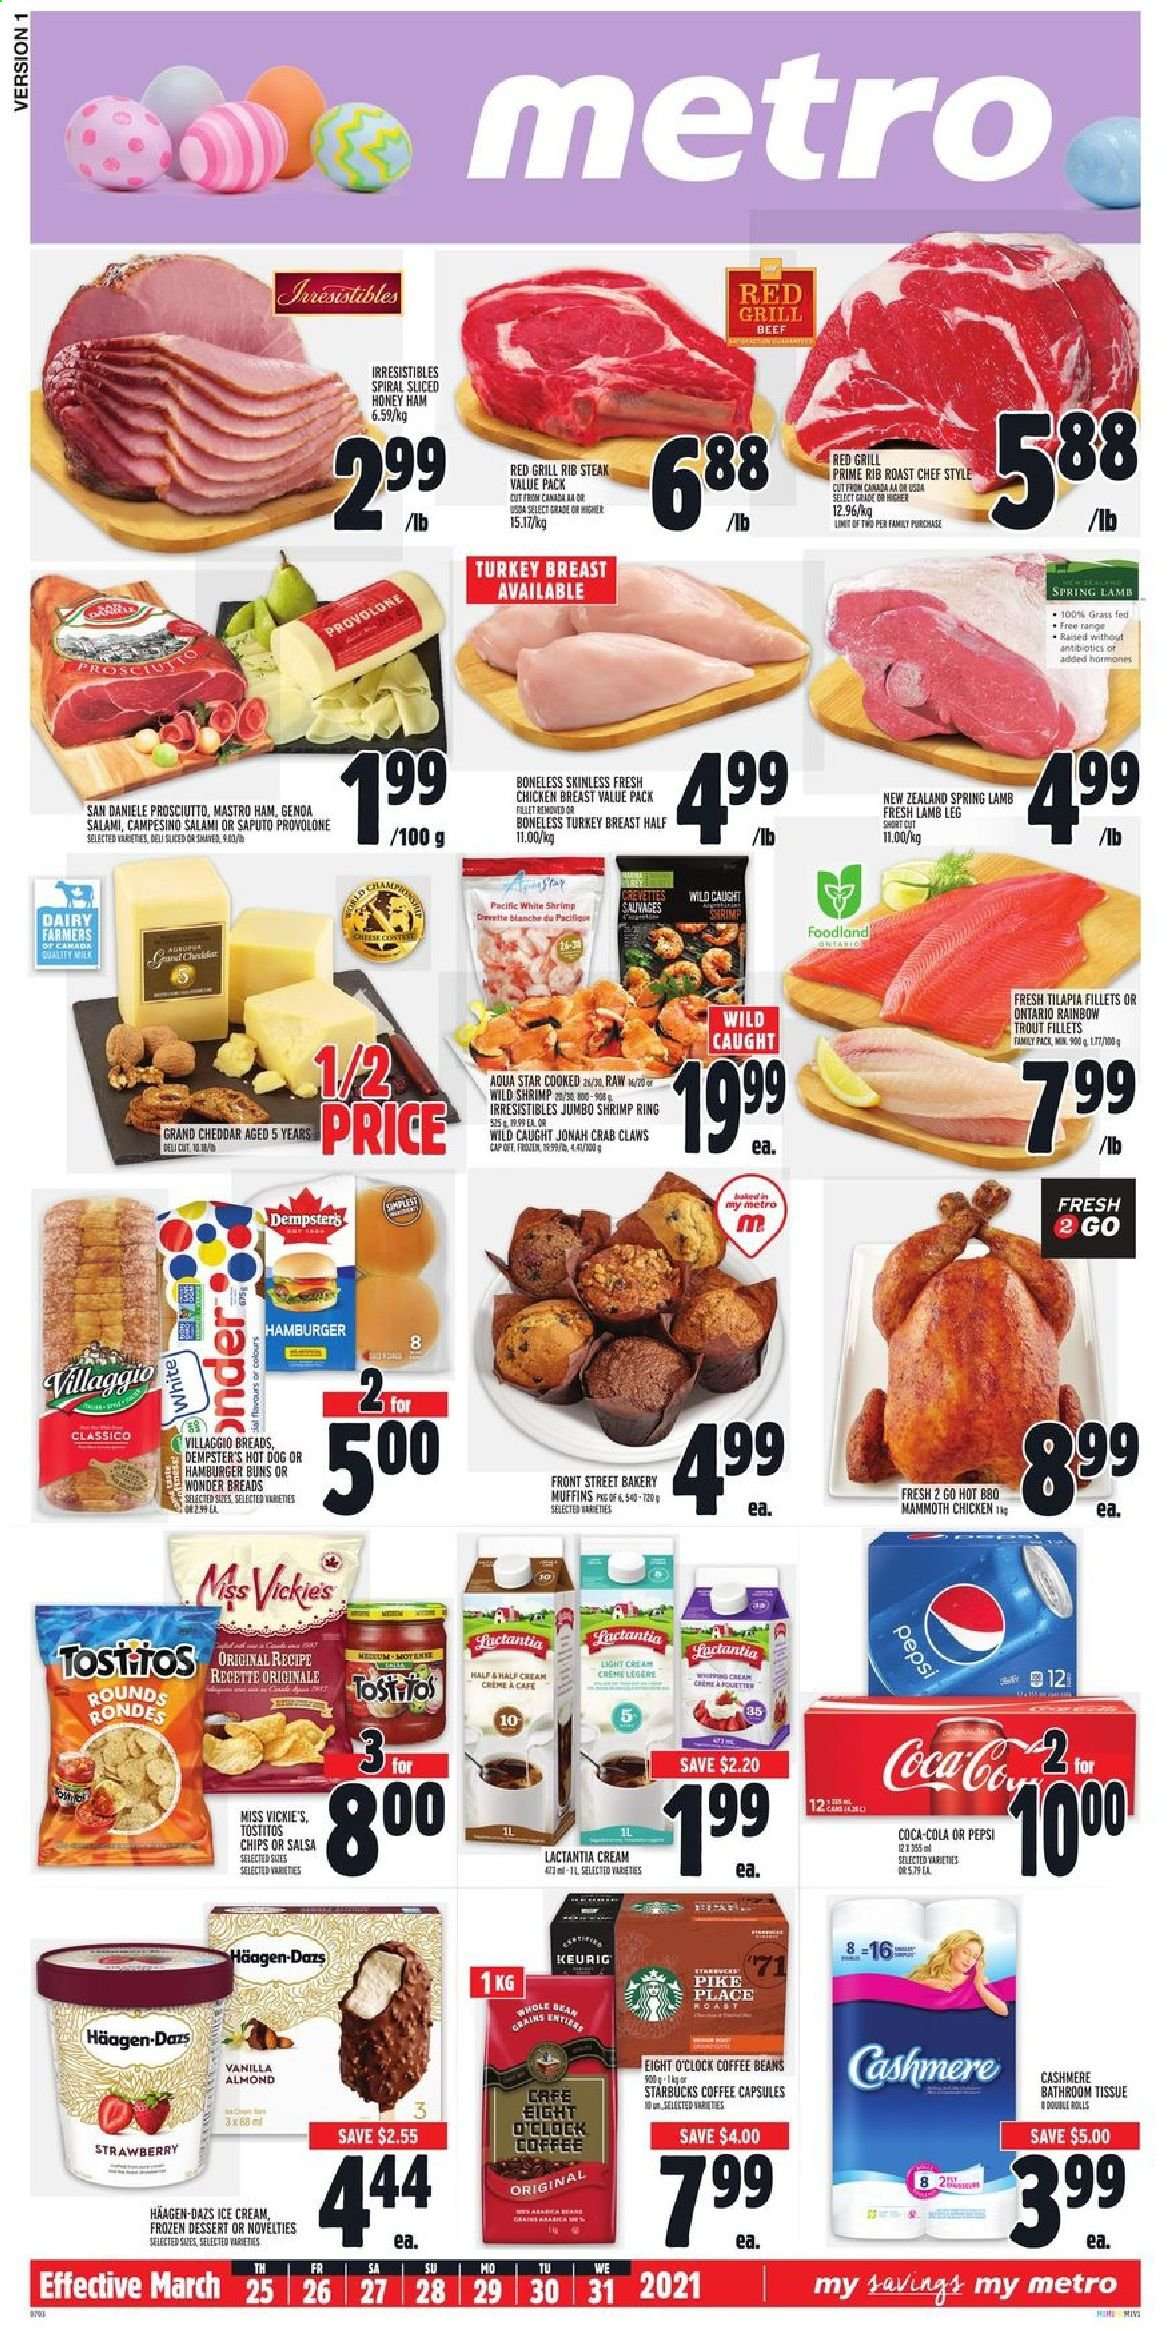 thumbnail - Metro Flyer - March 25, 2021 - March 31, 2021 - Sales products - buns, burger buns, muffin, tilapia, trout, crab, shrimps, hot dog, salami, ham, prosciutto, cheese, Provolone, ice cream, Häagen-Dazs, Tostitos, salsa, Classico, Coca-Cola, Pepsi, coffee beans, coffee capsules, Starbucks, Eight O'Clock, turkey breast, chicken breasts, chicken, turkey, lamb meat, lamb leg, bath tissue, steak. Page 1.